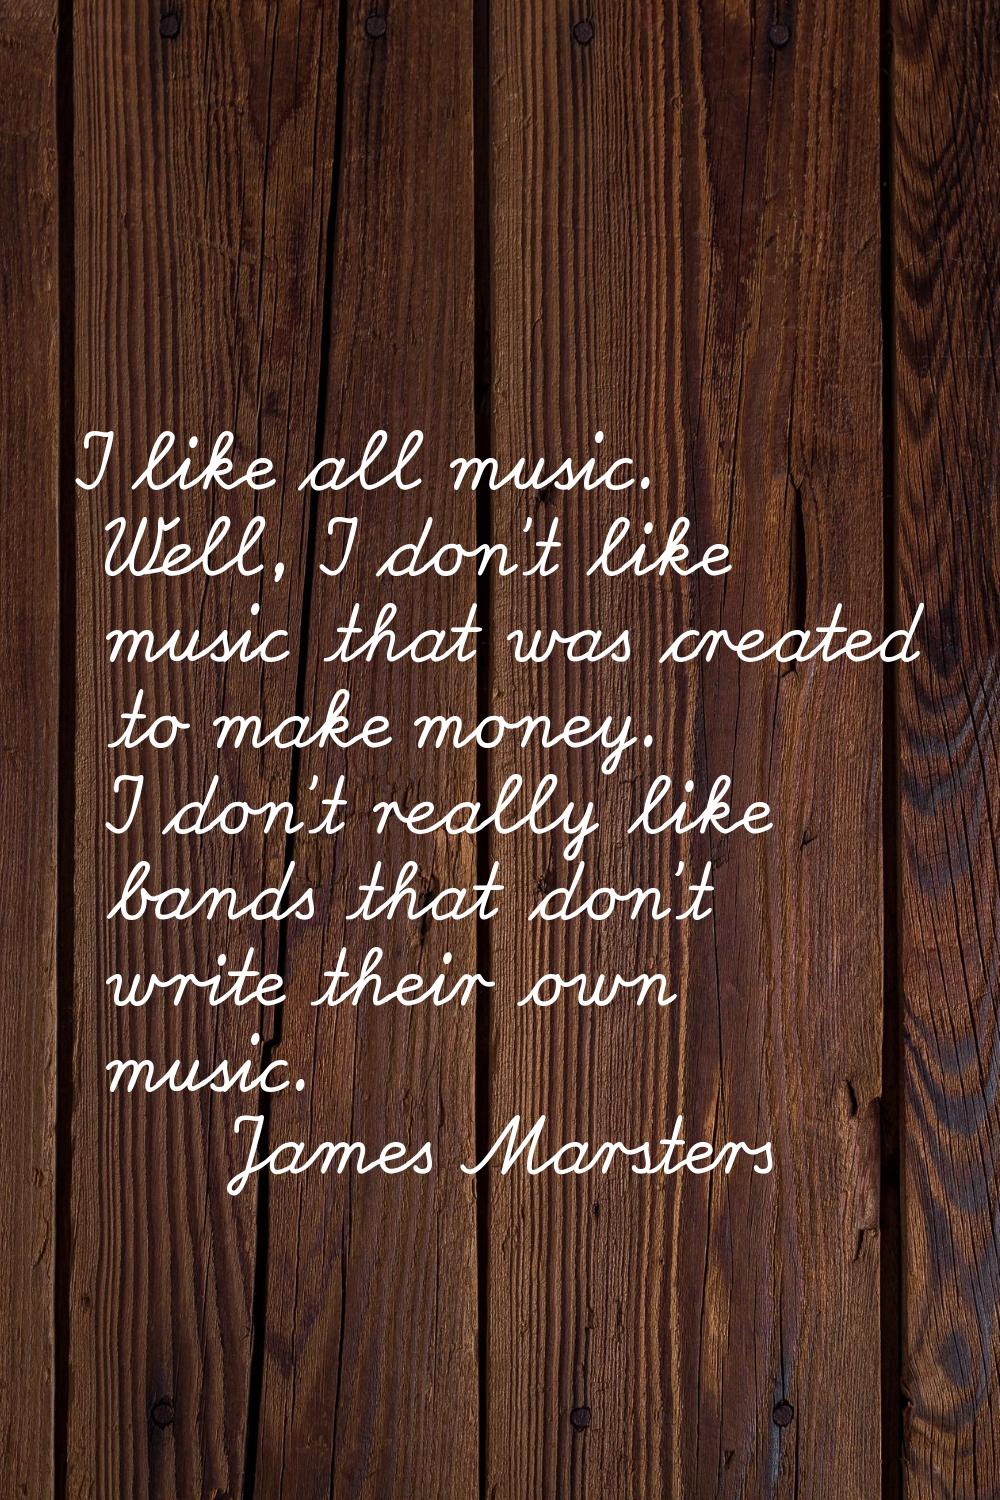 I like all music. Well, I don't like music that was created to make money. I don't really like band